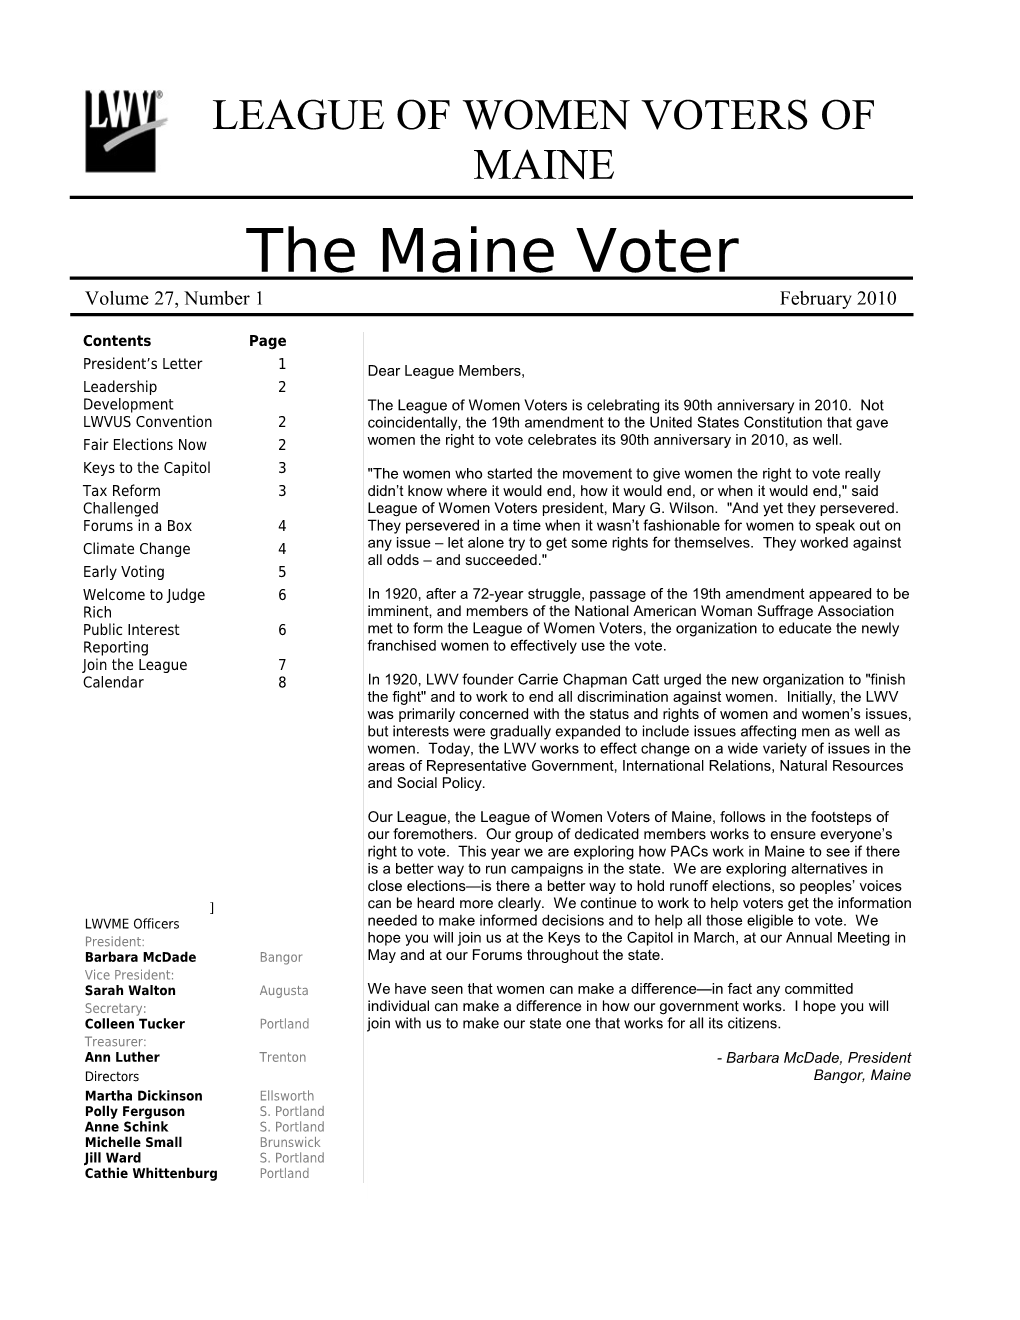 League of Women Voters of Maine